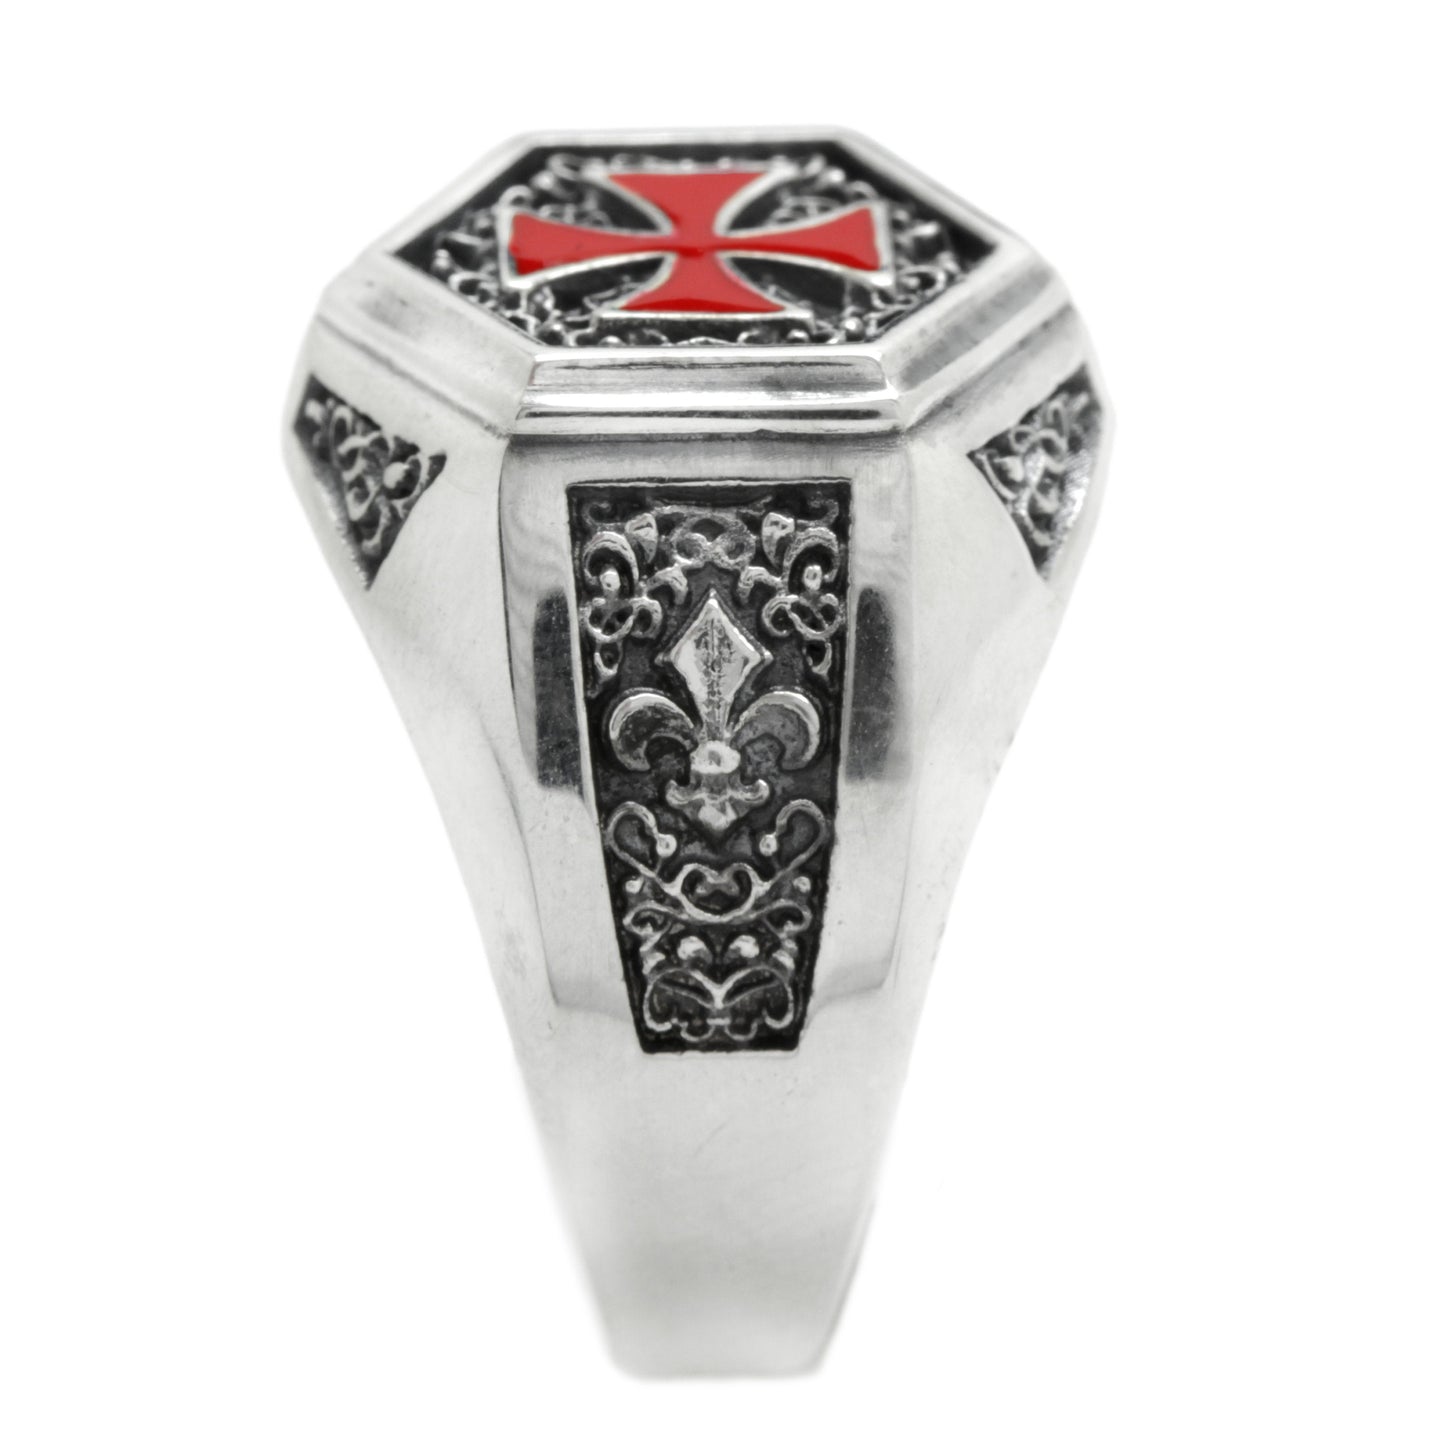 Knights Templar Ring, The Order of Solomon Temple Signet with Cross Red Enamel